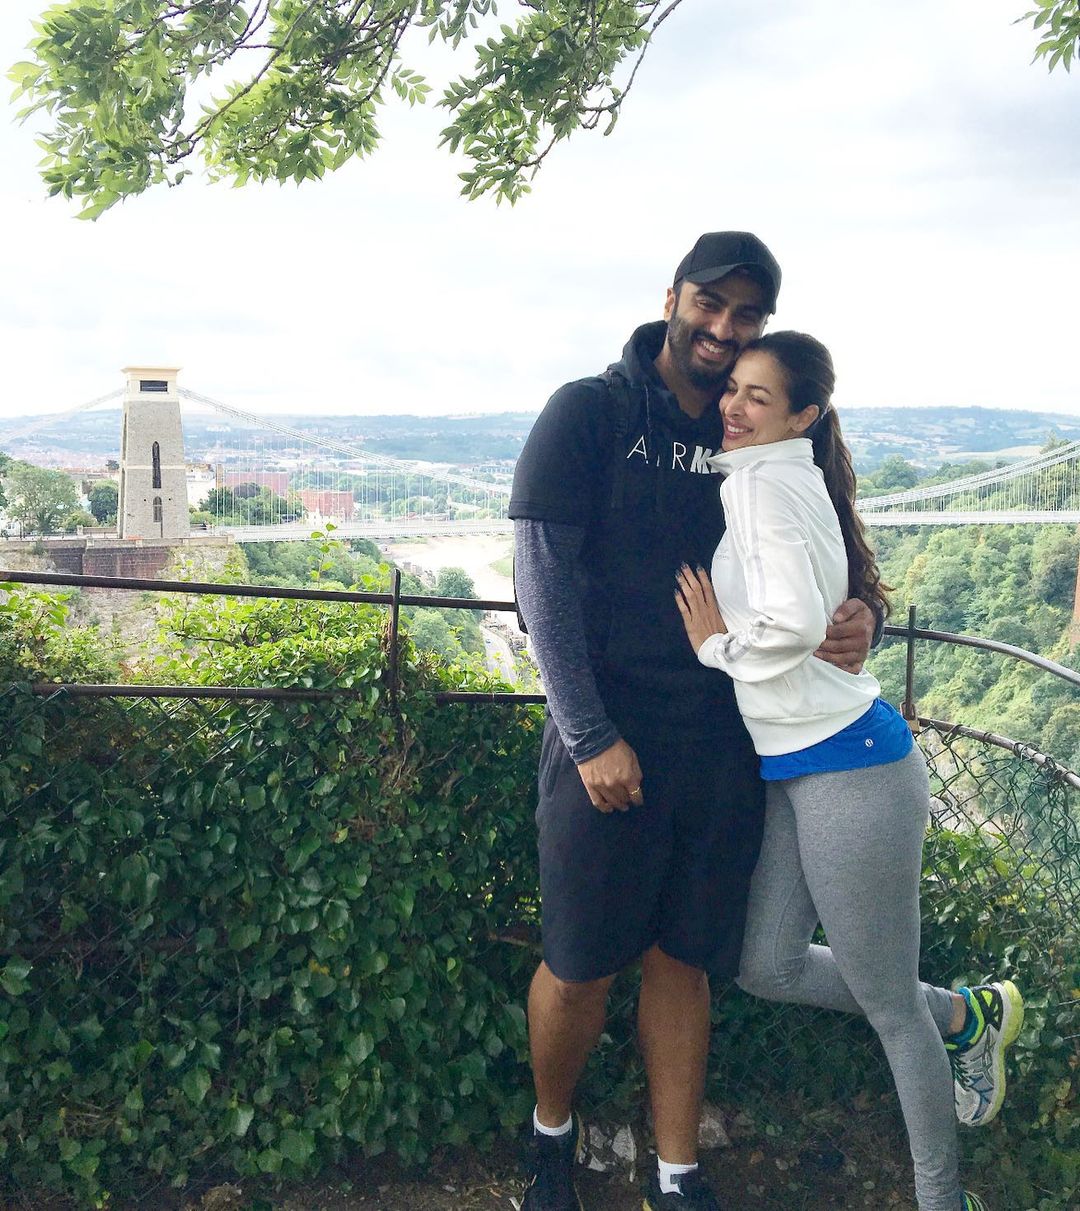 Malaika wished the love of her life with an adorable picture and a heartwarming note. (Image: Instagram)